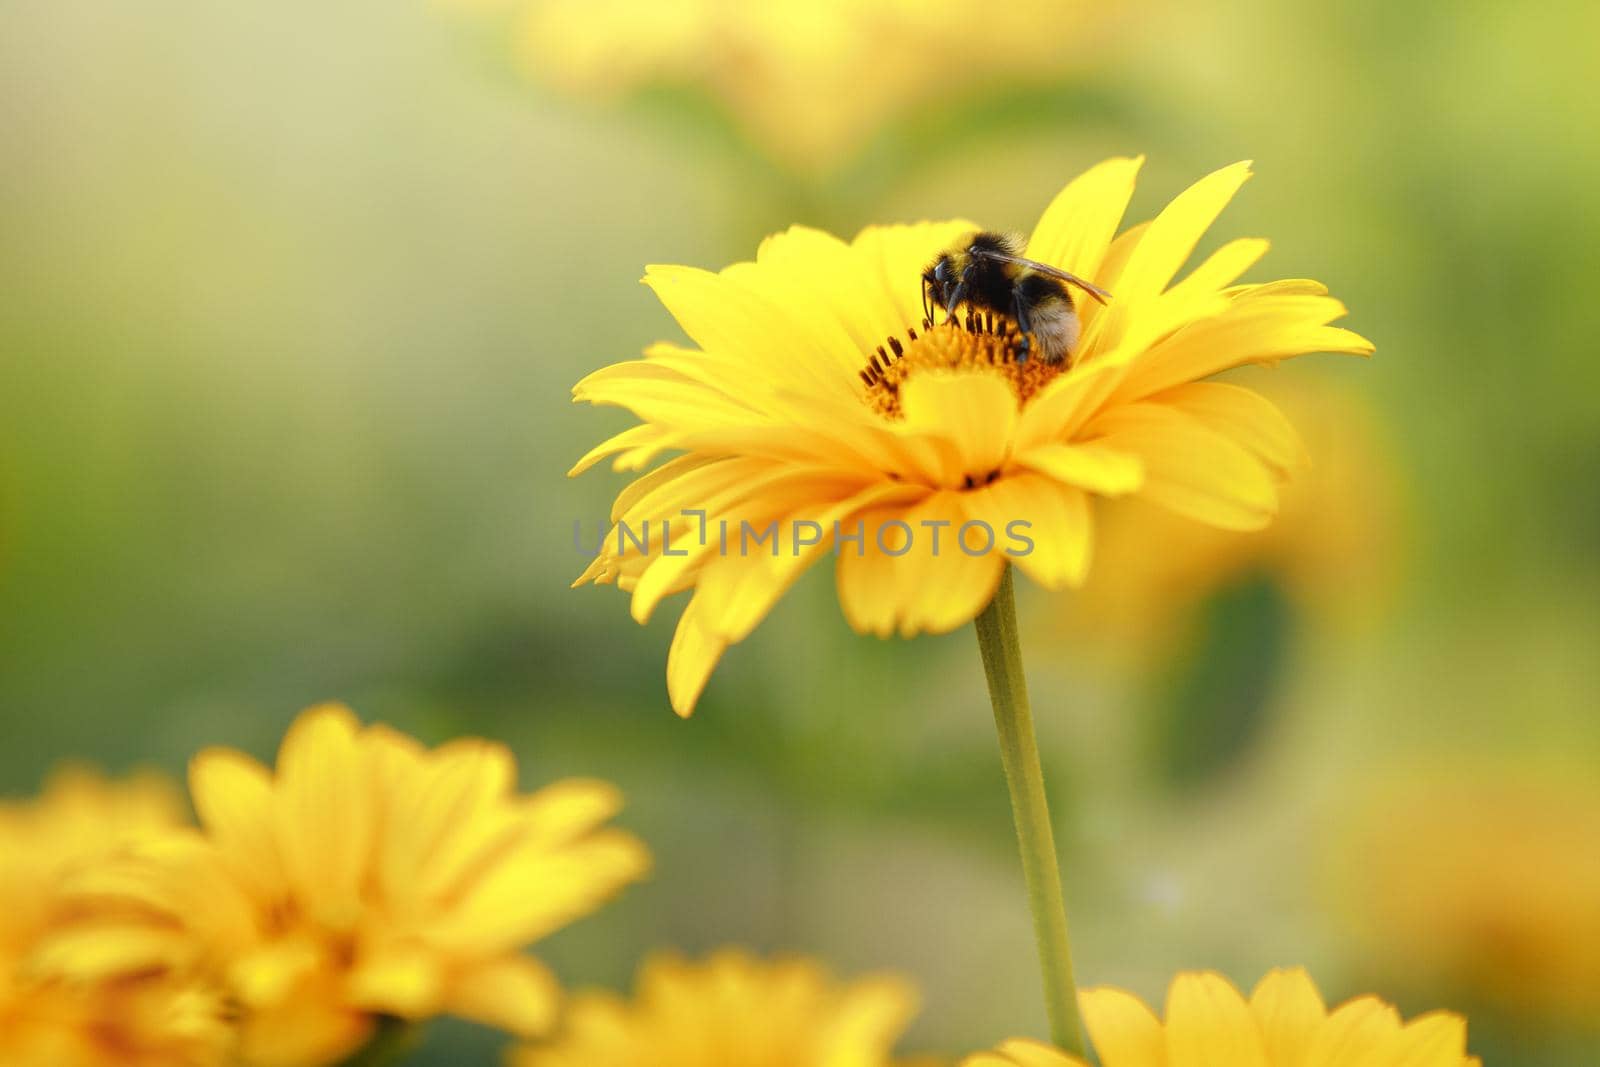 Blurred background of many yellow Echinacea flowers with a bee on the petals. Gift card, with copy space.